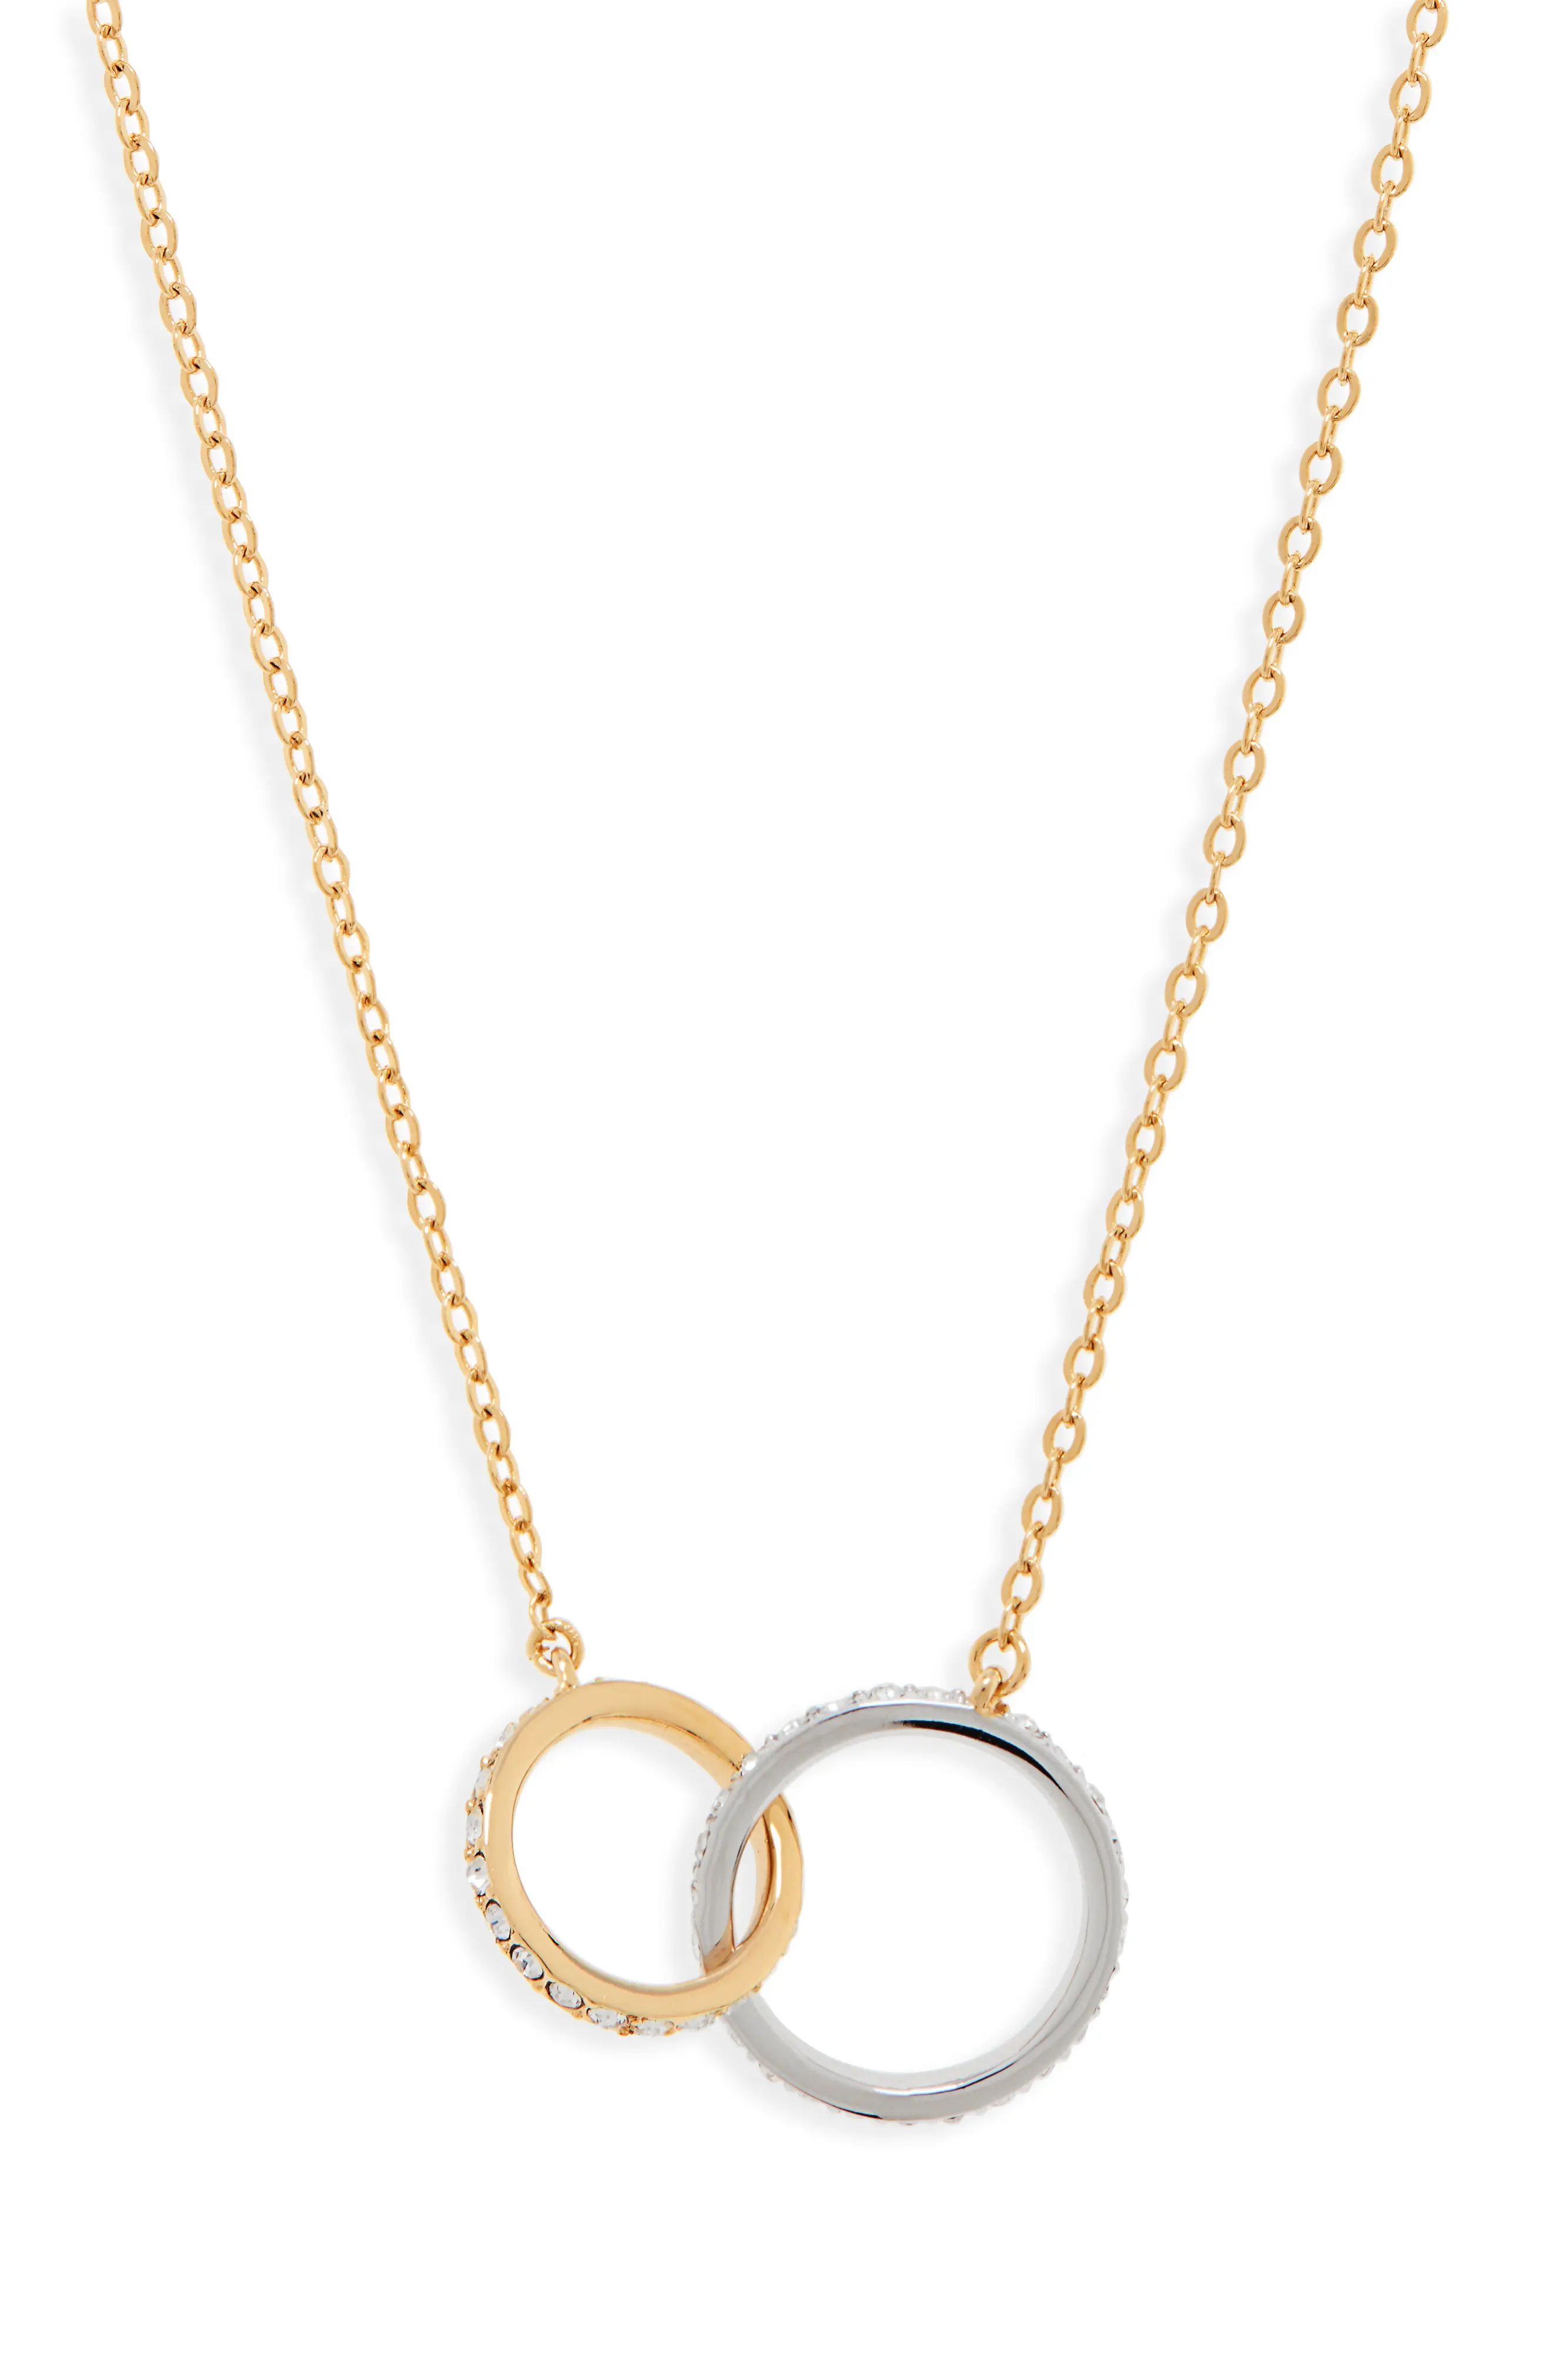 Gifts for the Jewelry Lover | Nordstrom | Nordstrom